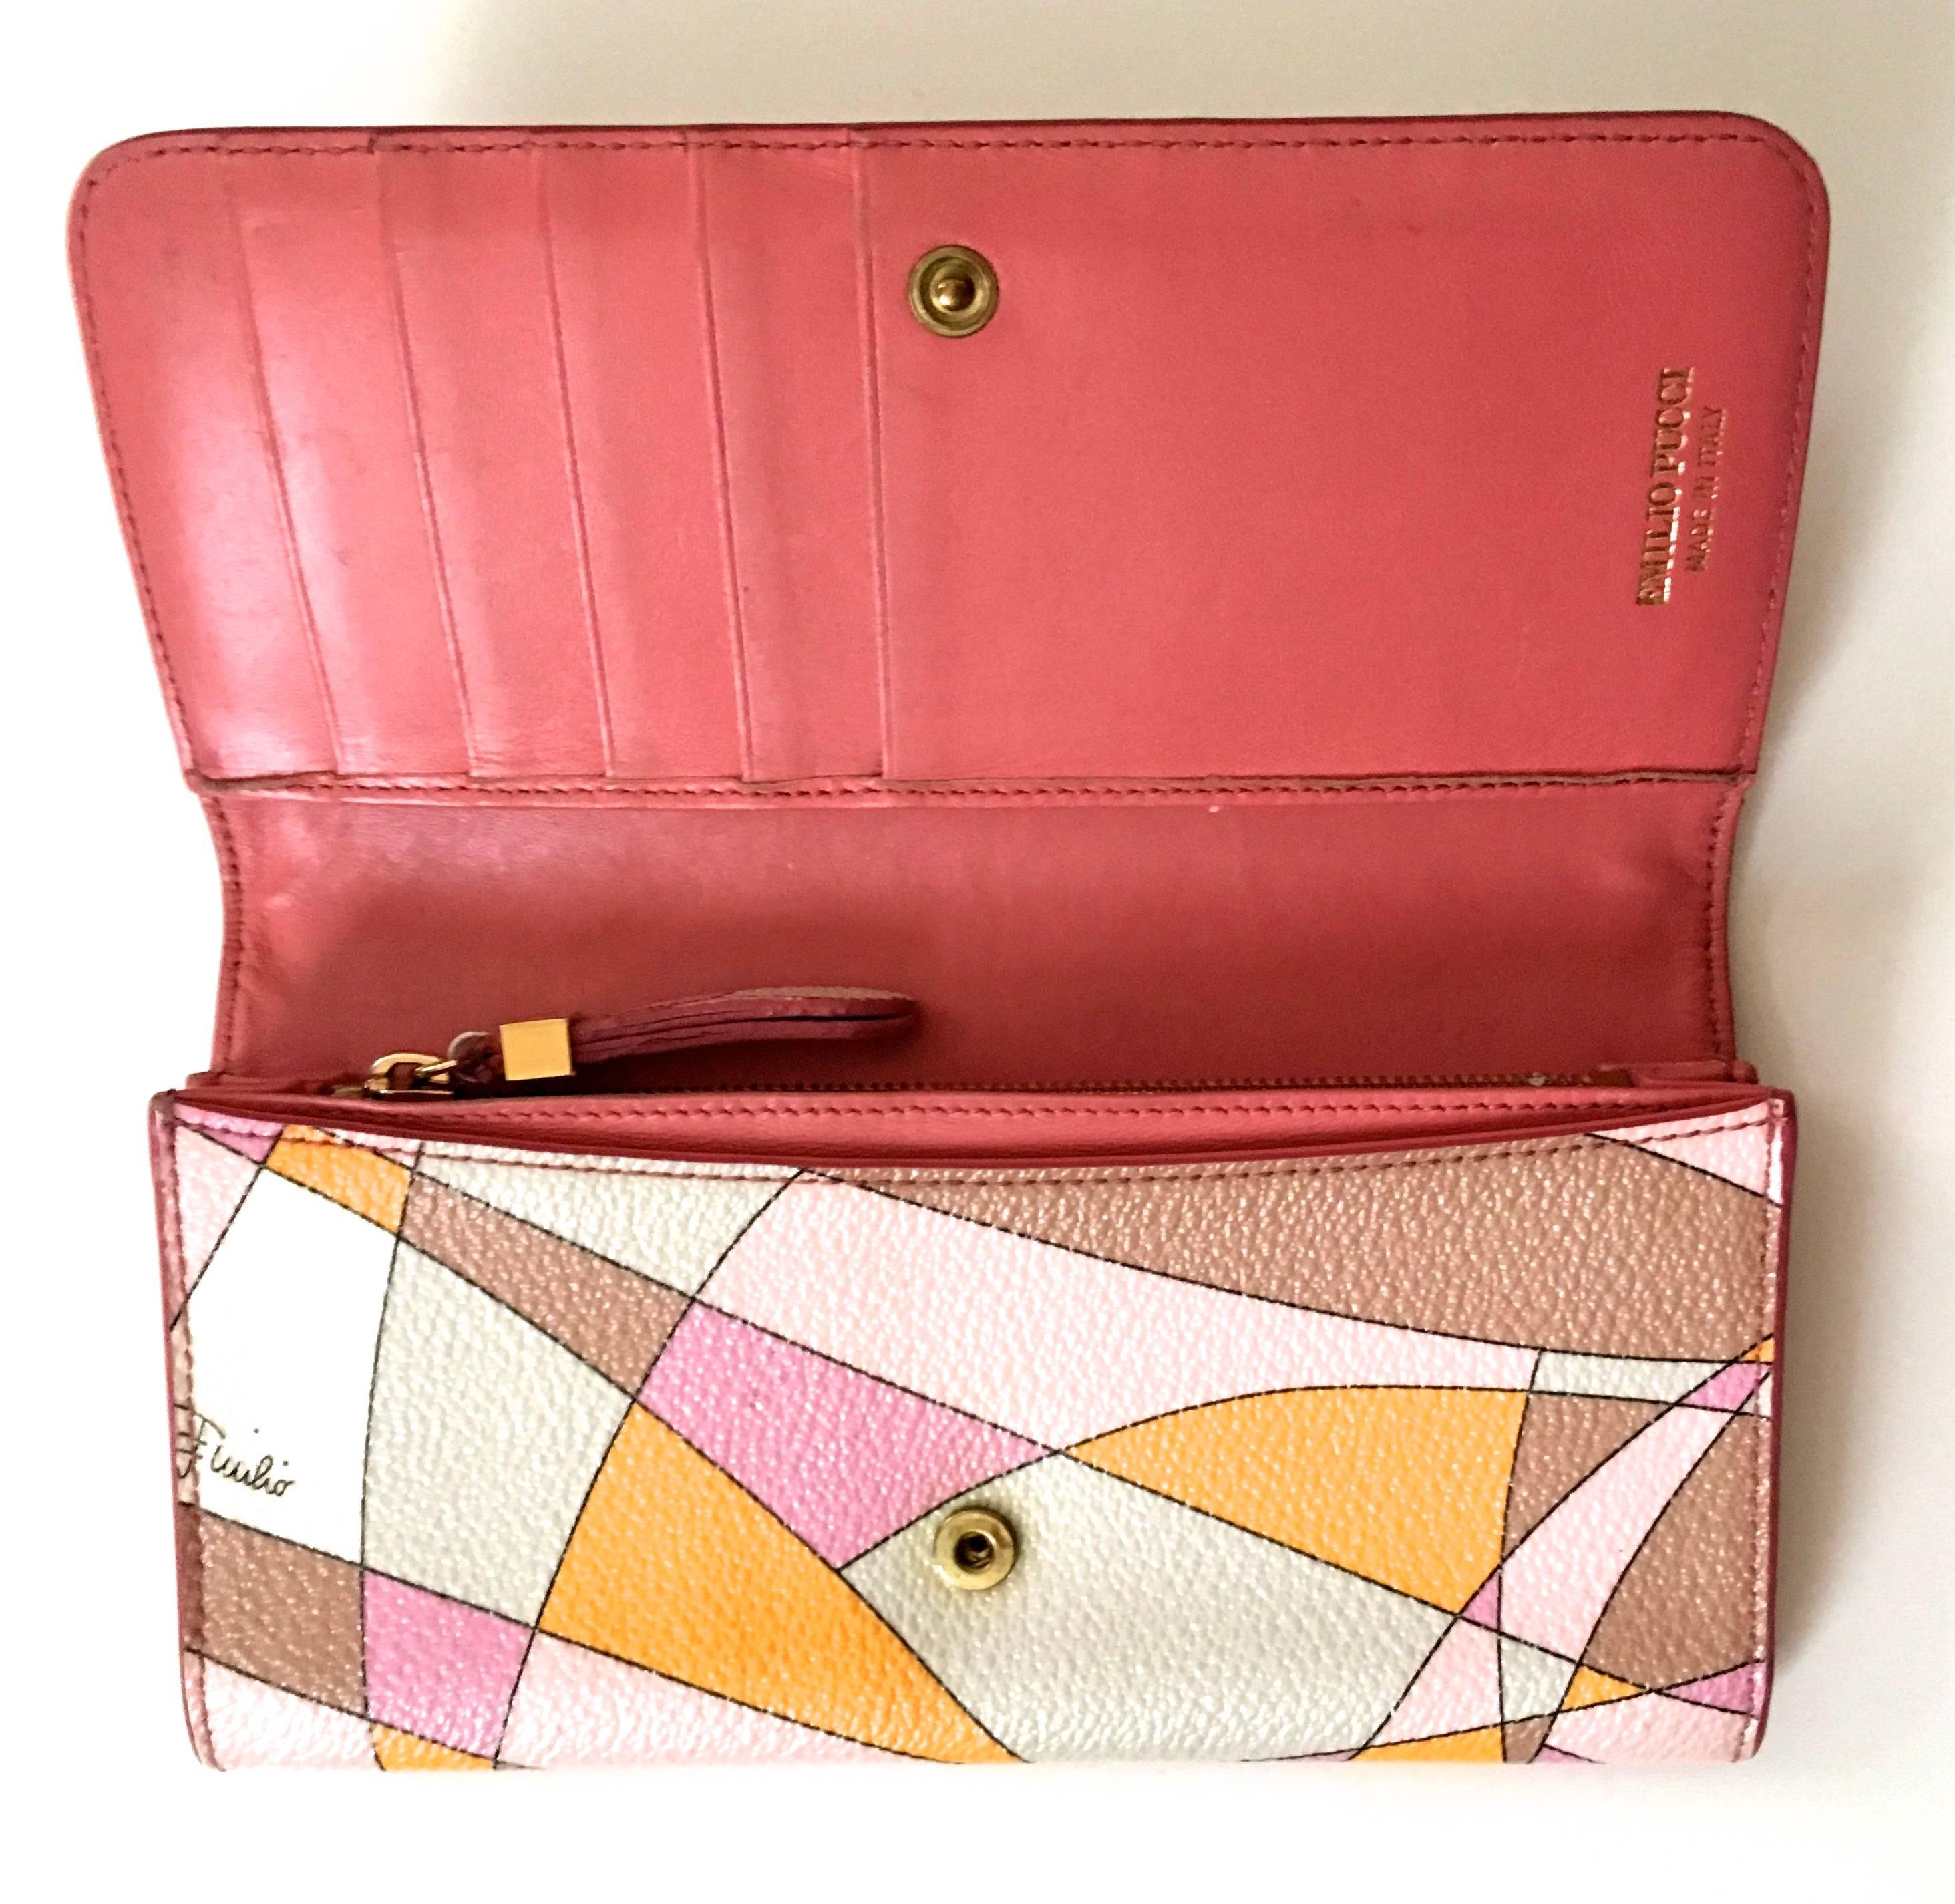 Presented here is a leather wallet from Emilio Pucci. This lovely wallet is made of 100% leather throughout. On the exterior of the wallet, there is a geometric design in colors of pink, white, orange, beige and tan. The wallet opens to reveal solid